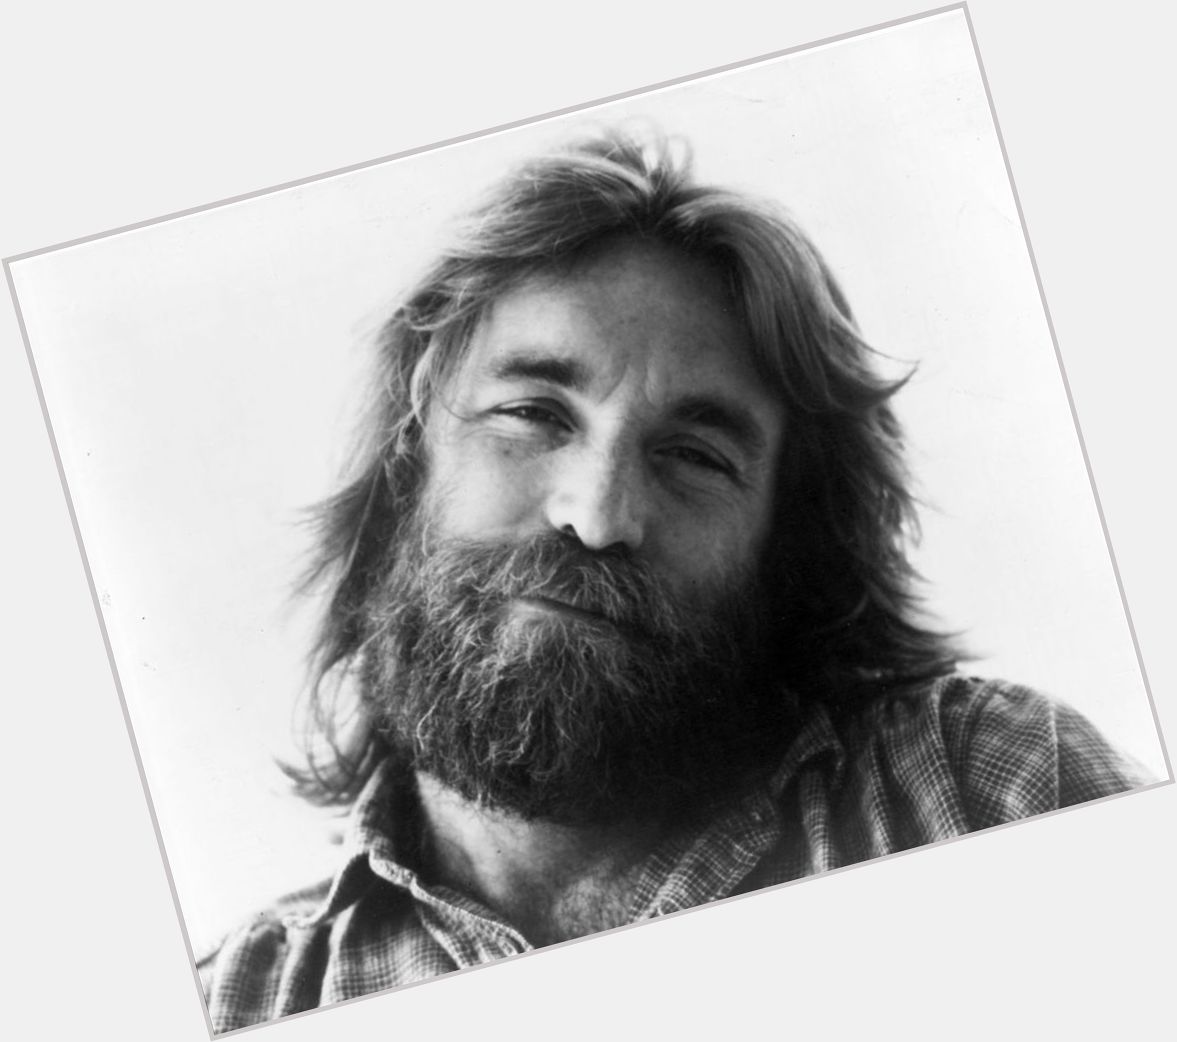  on with wishes Dennis Wilson a happy birthday! 